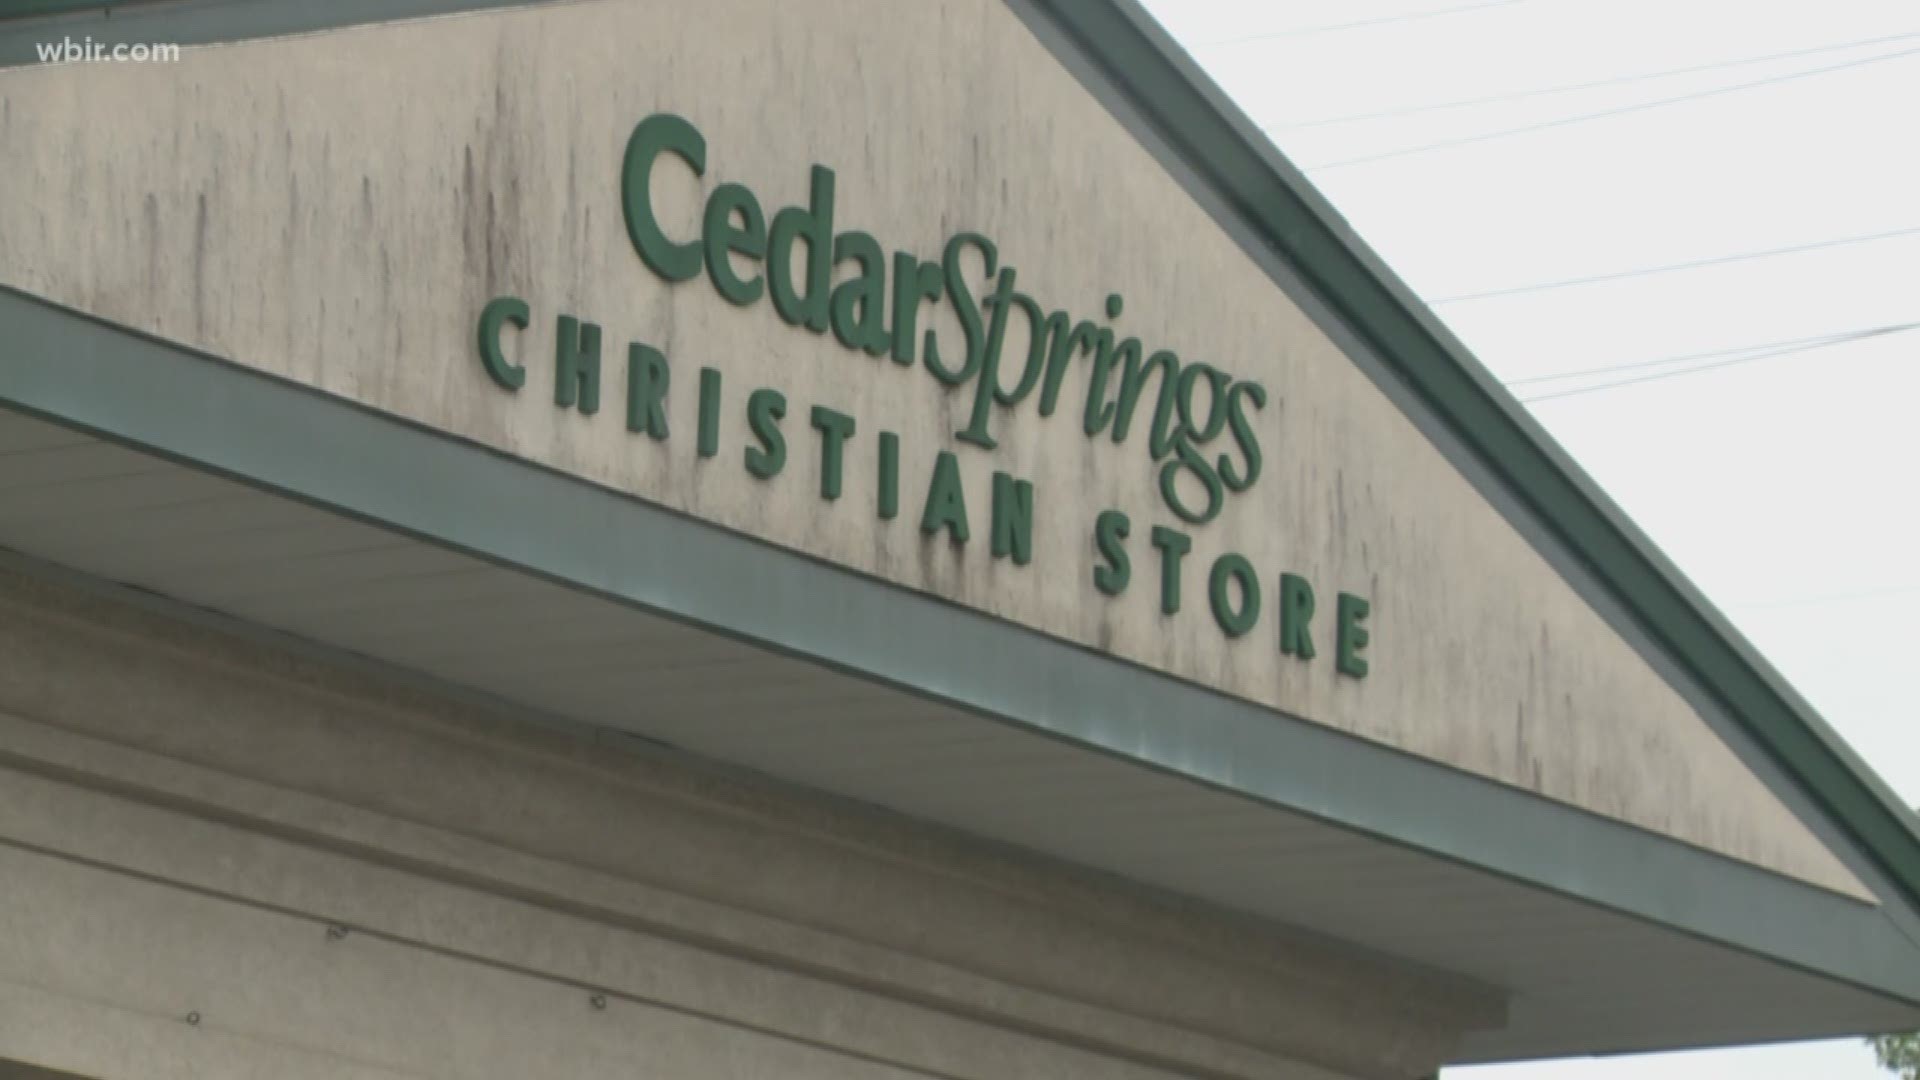 The Cedar Springs Christian bookstore is not going out of business after announcing it planned to close last fall.